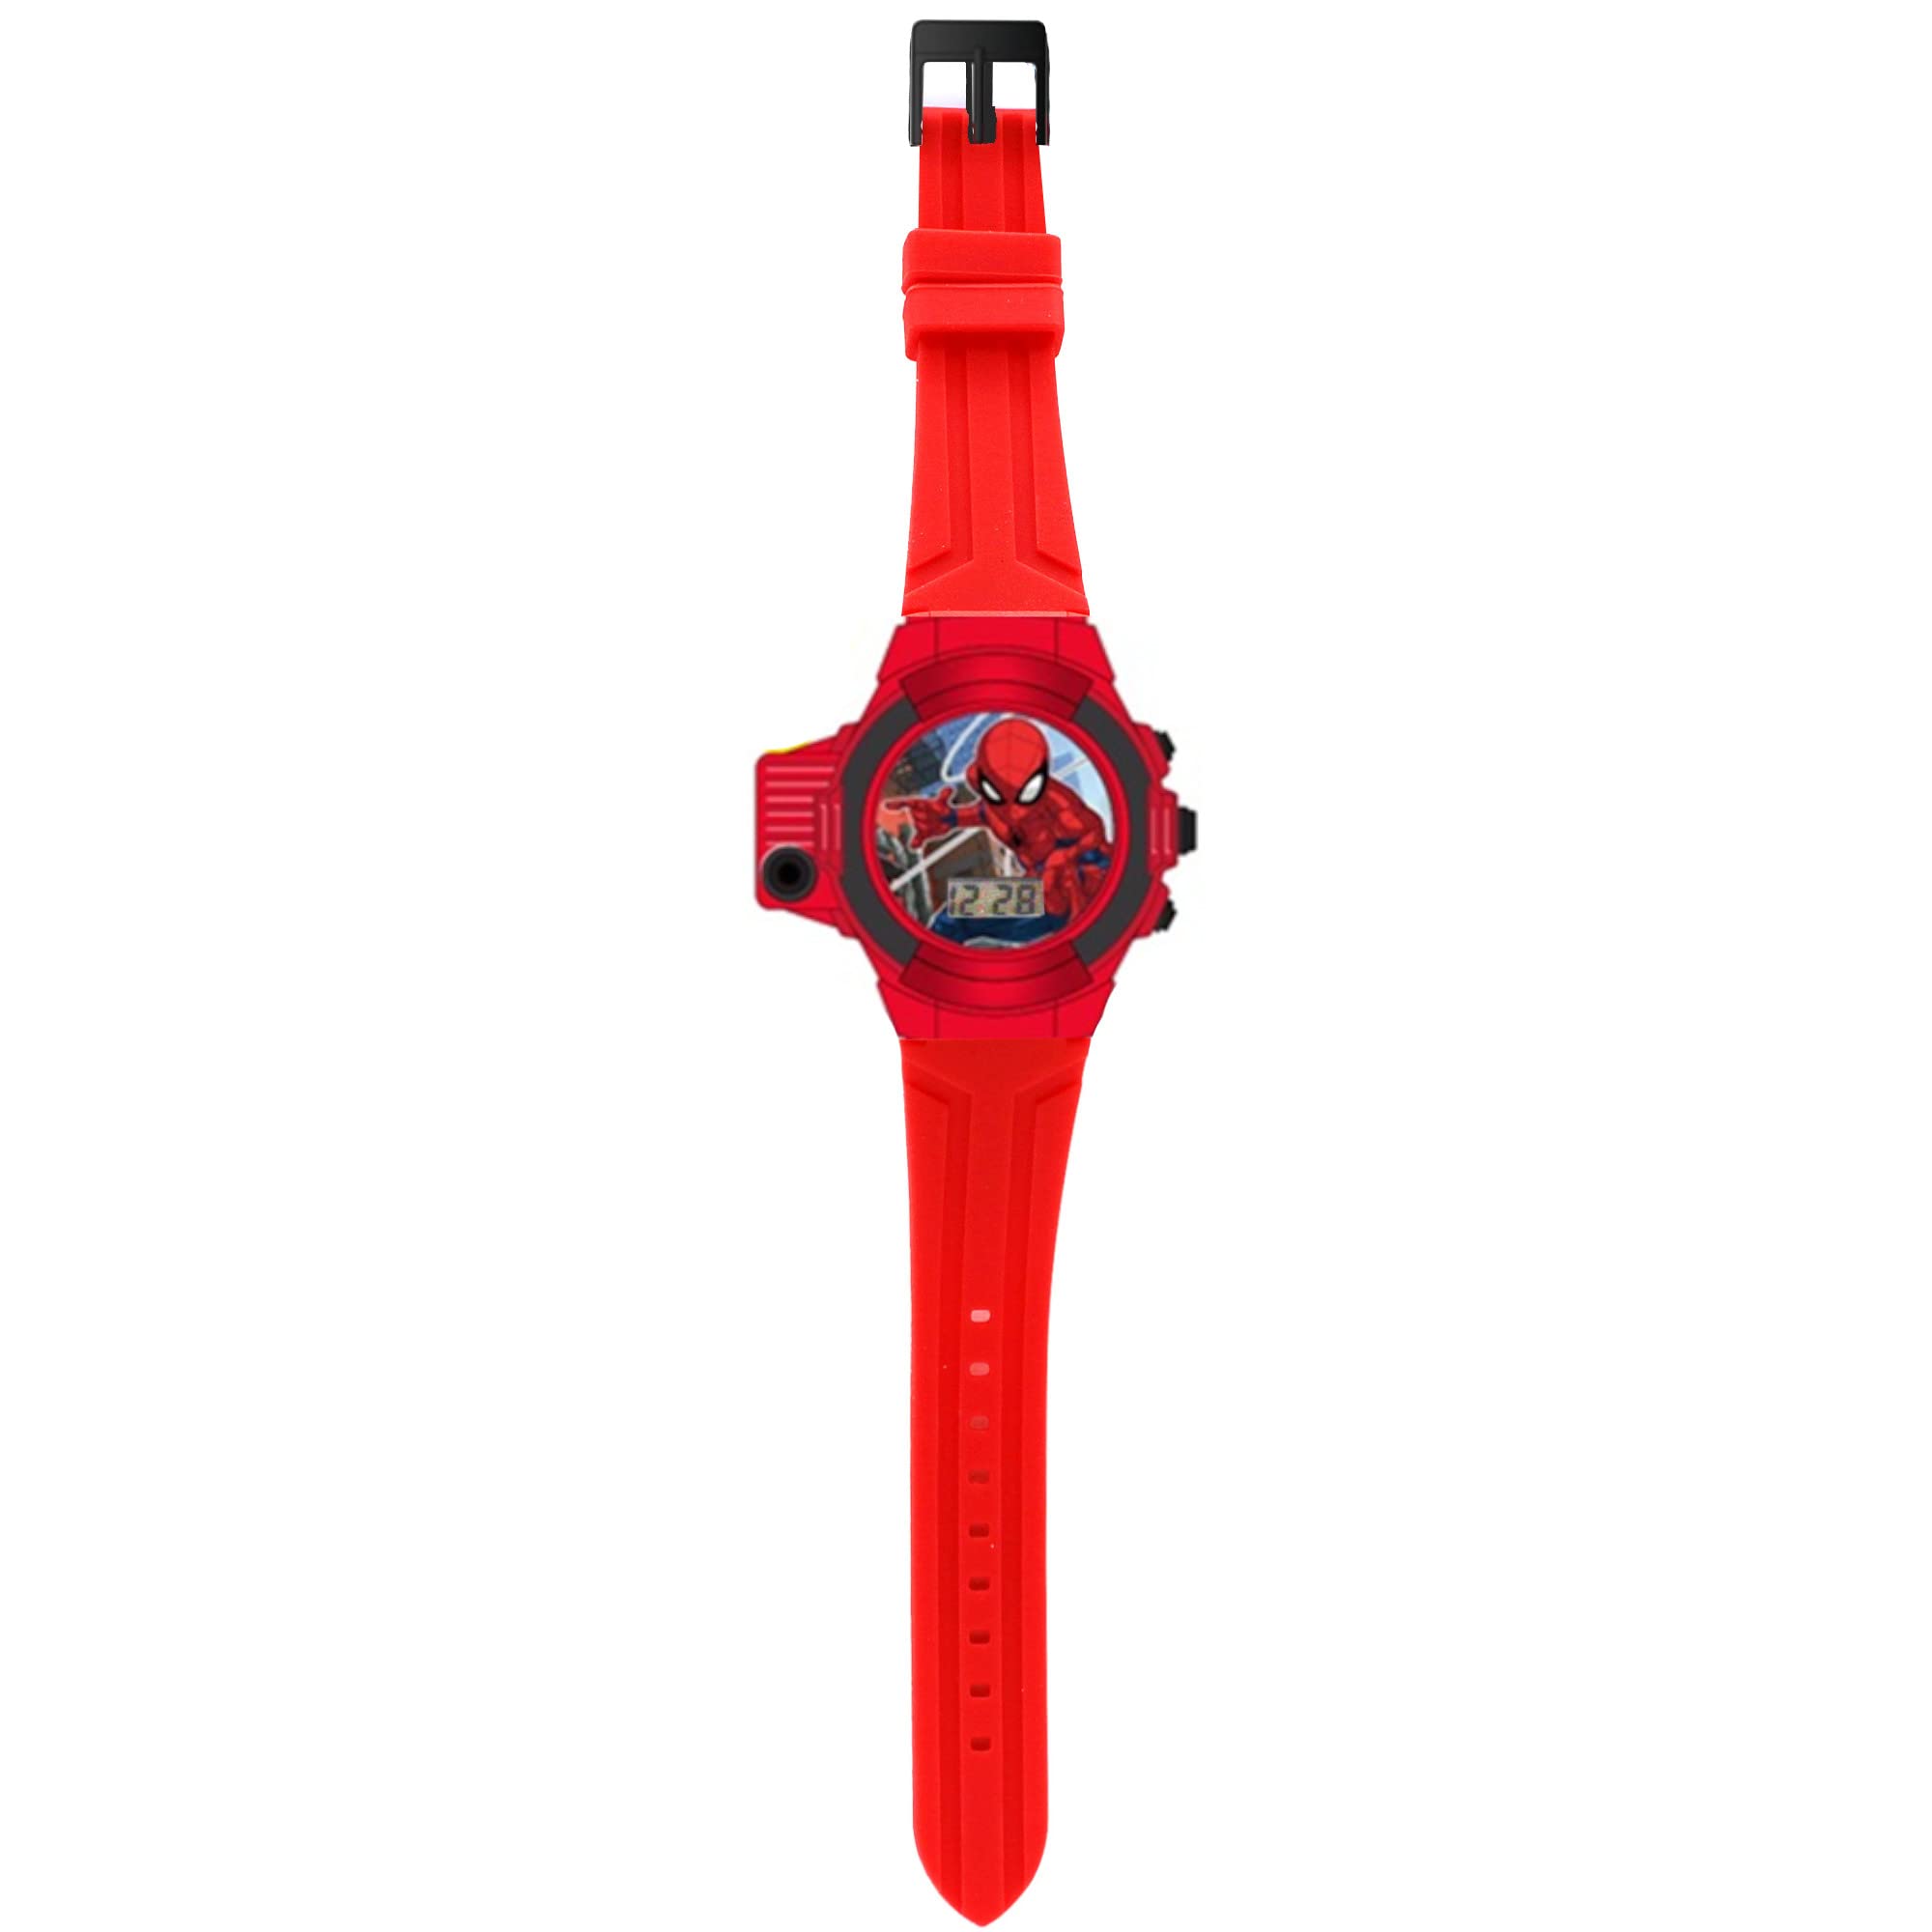 Accutime Kids Marvel Spiderman Red Digital LCD Quartz Wrist-Watch with Flashlight and Red Strap for Boys, Girls and Toddlers (Model: SPD4747AZ)